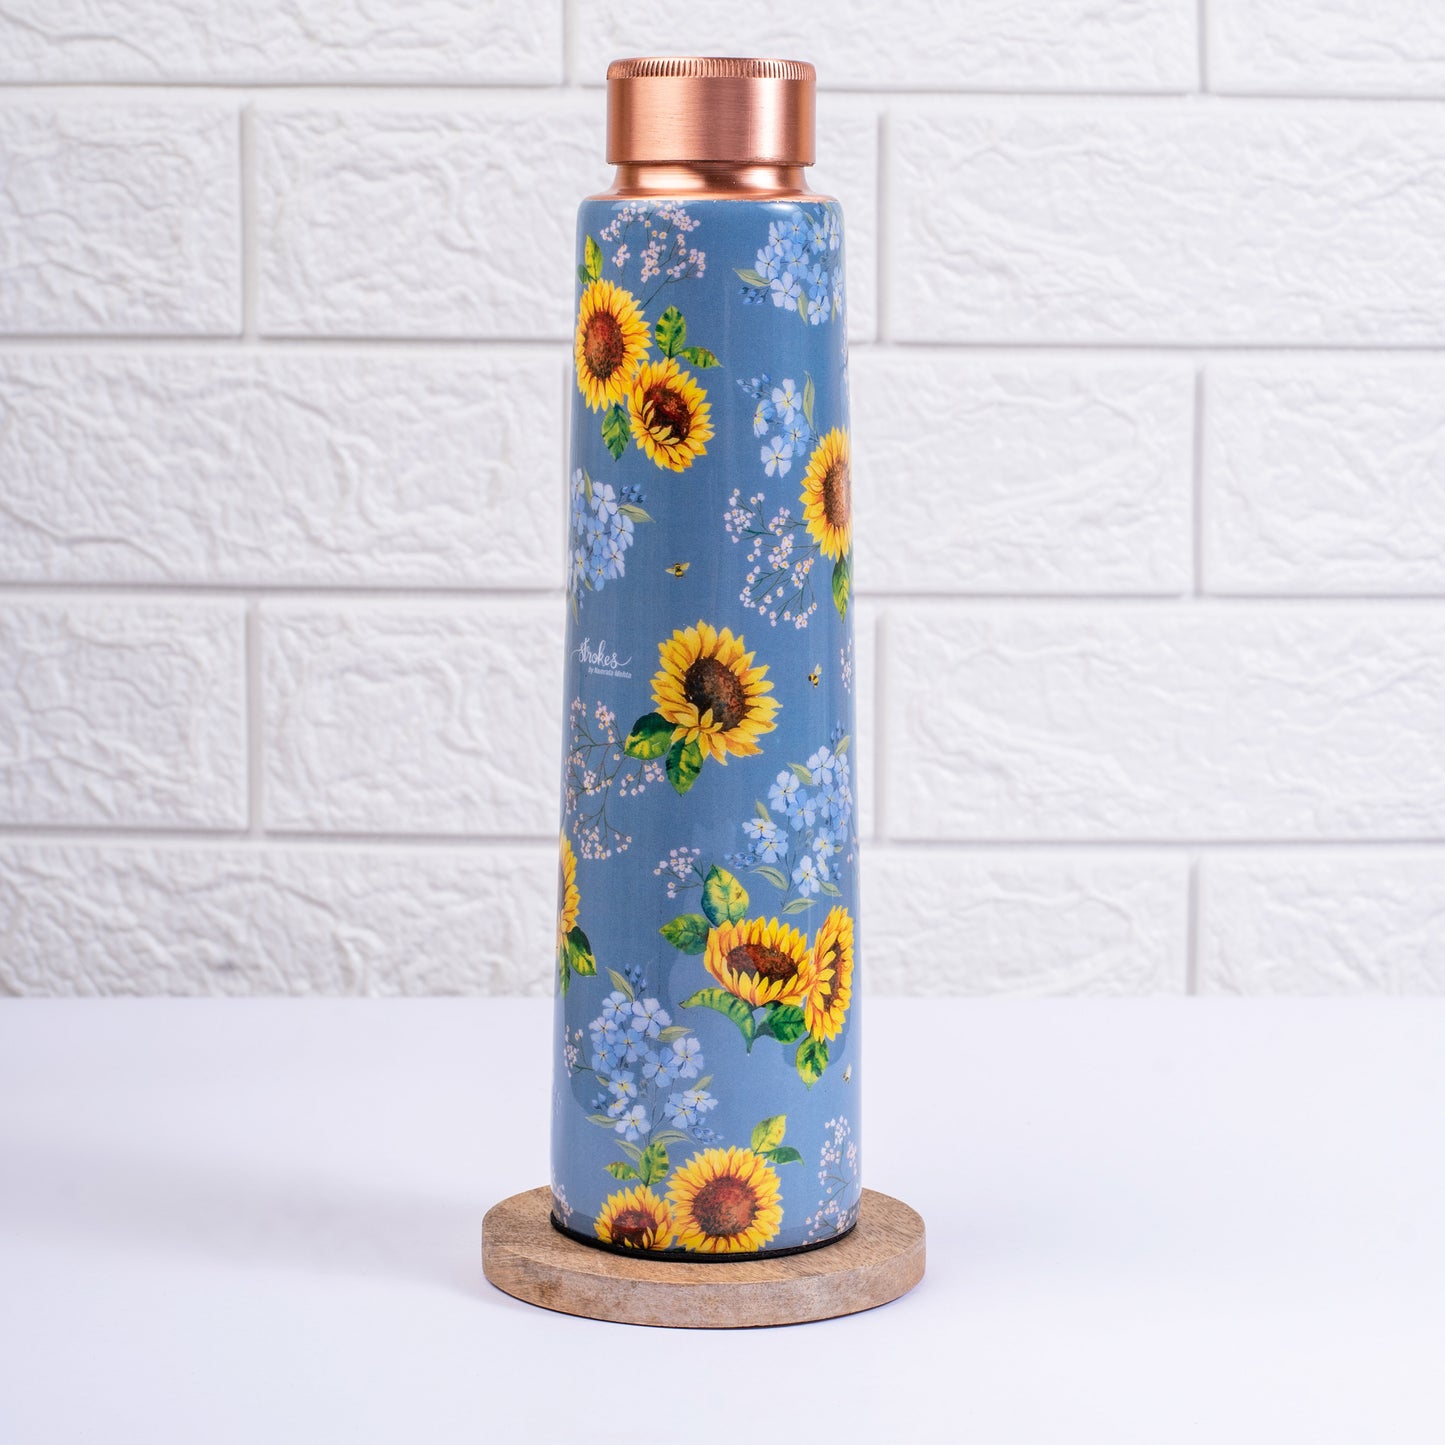 Garden Blooms Copper Bottle and Tumblers - Gift Set